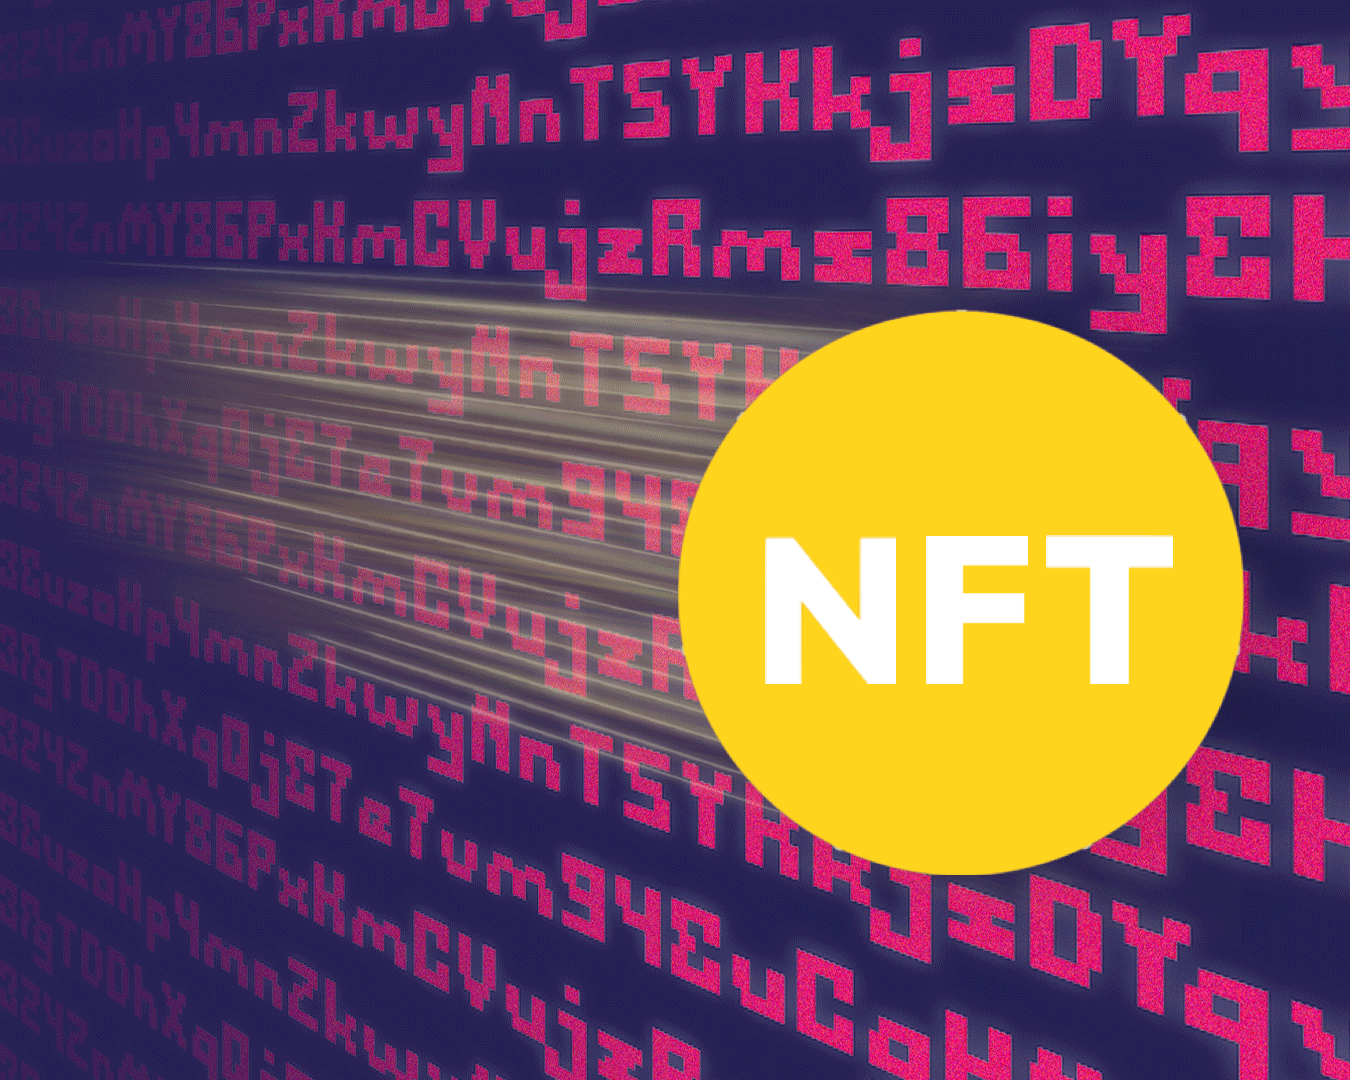 How To Mint An NFT - A Step-By-Step Guide